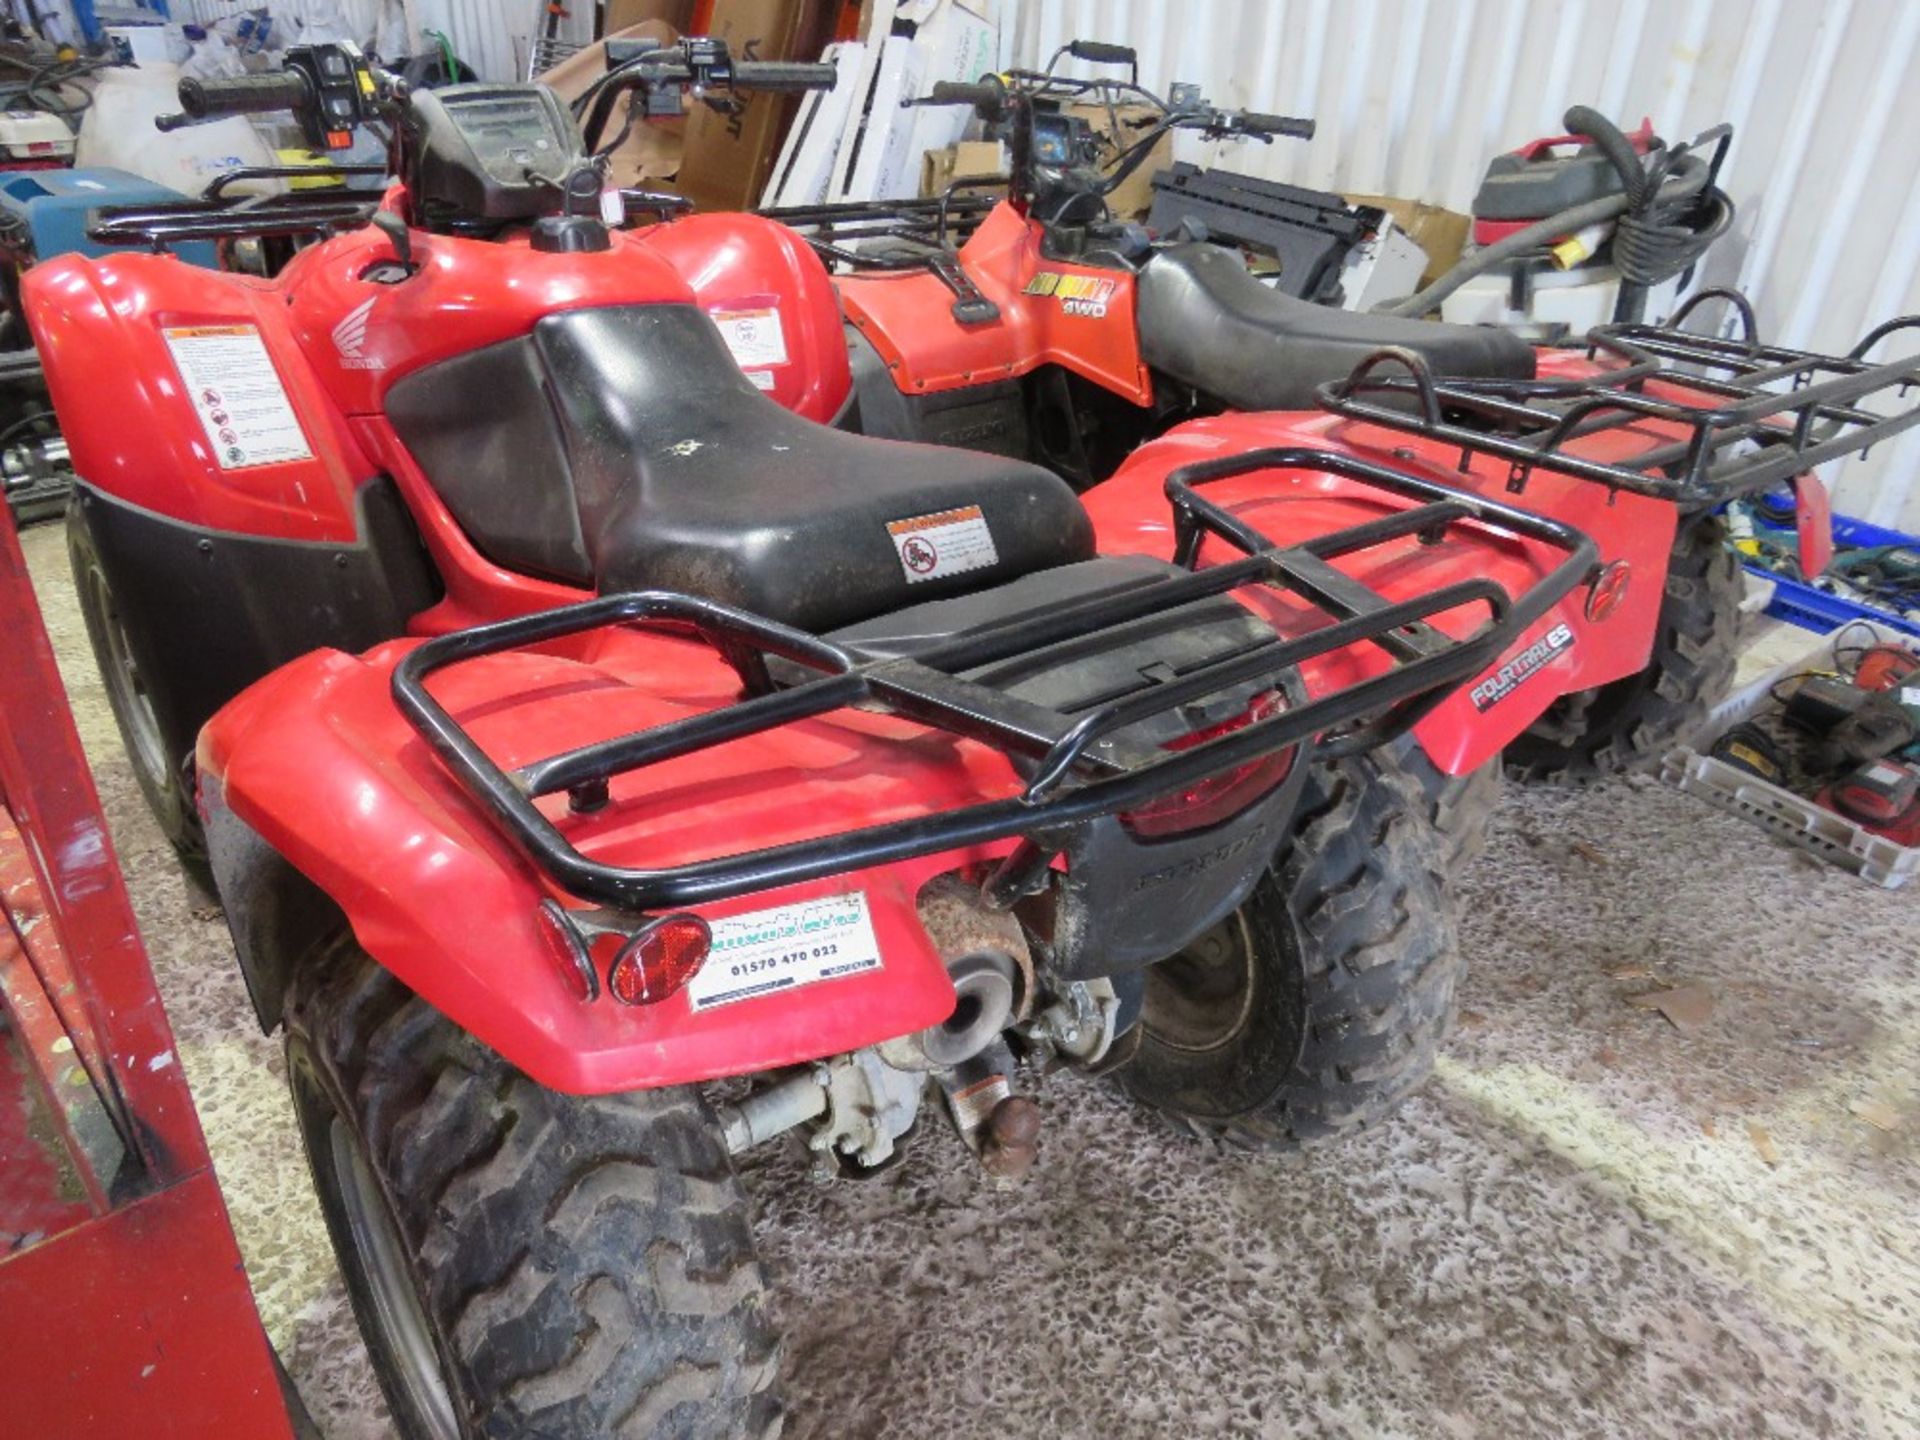 HONDA SELECTABLE 4 WHEEL DRIVE QUAD BIKE WITH ELECTRONIC GEAR SELECTION. WHEN TESTED WAS SEEN TO RUN - Image 7 of 11